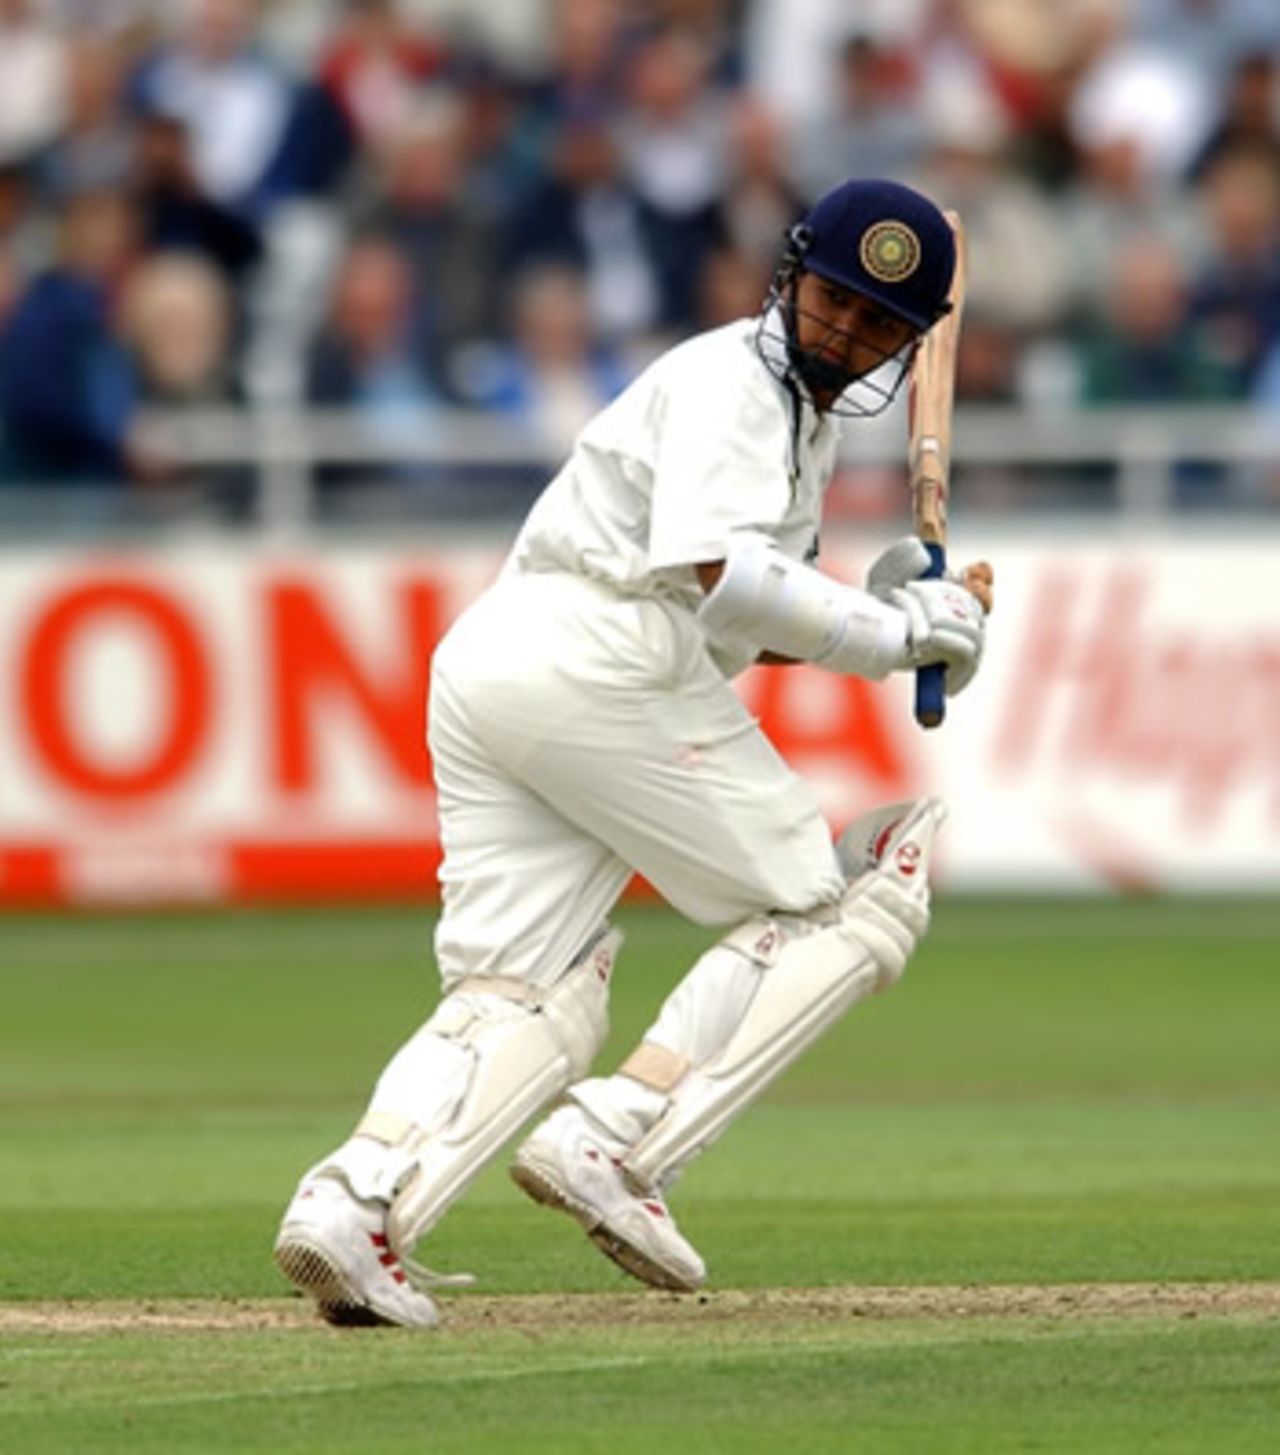 Parthiv Patel of India in action during the second day of the NPower Second Test match between England and India on August 9, 2002 played at Trent Bridge in Nottingham, England.